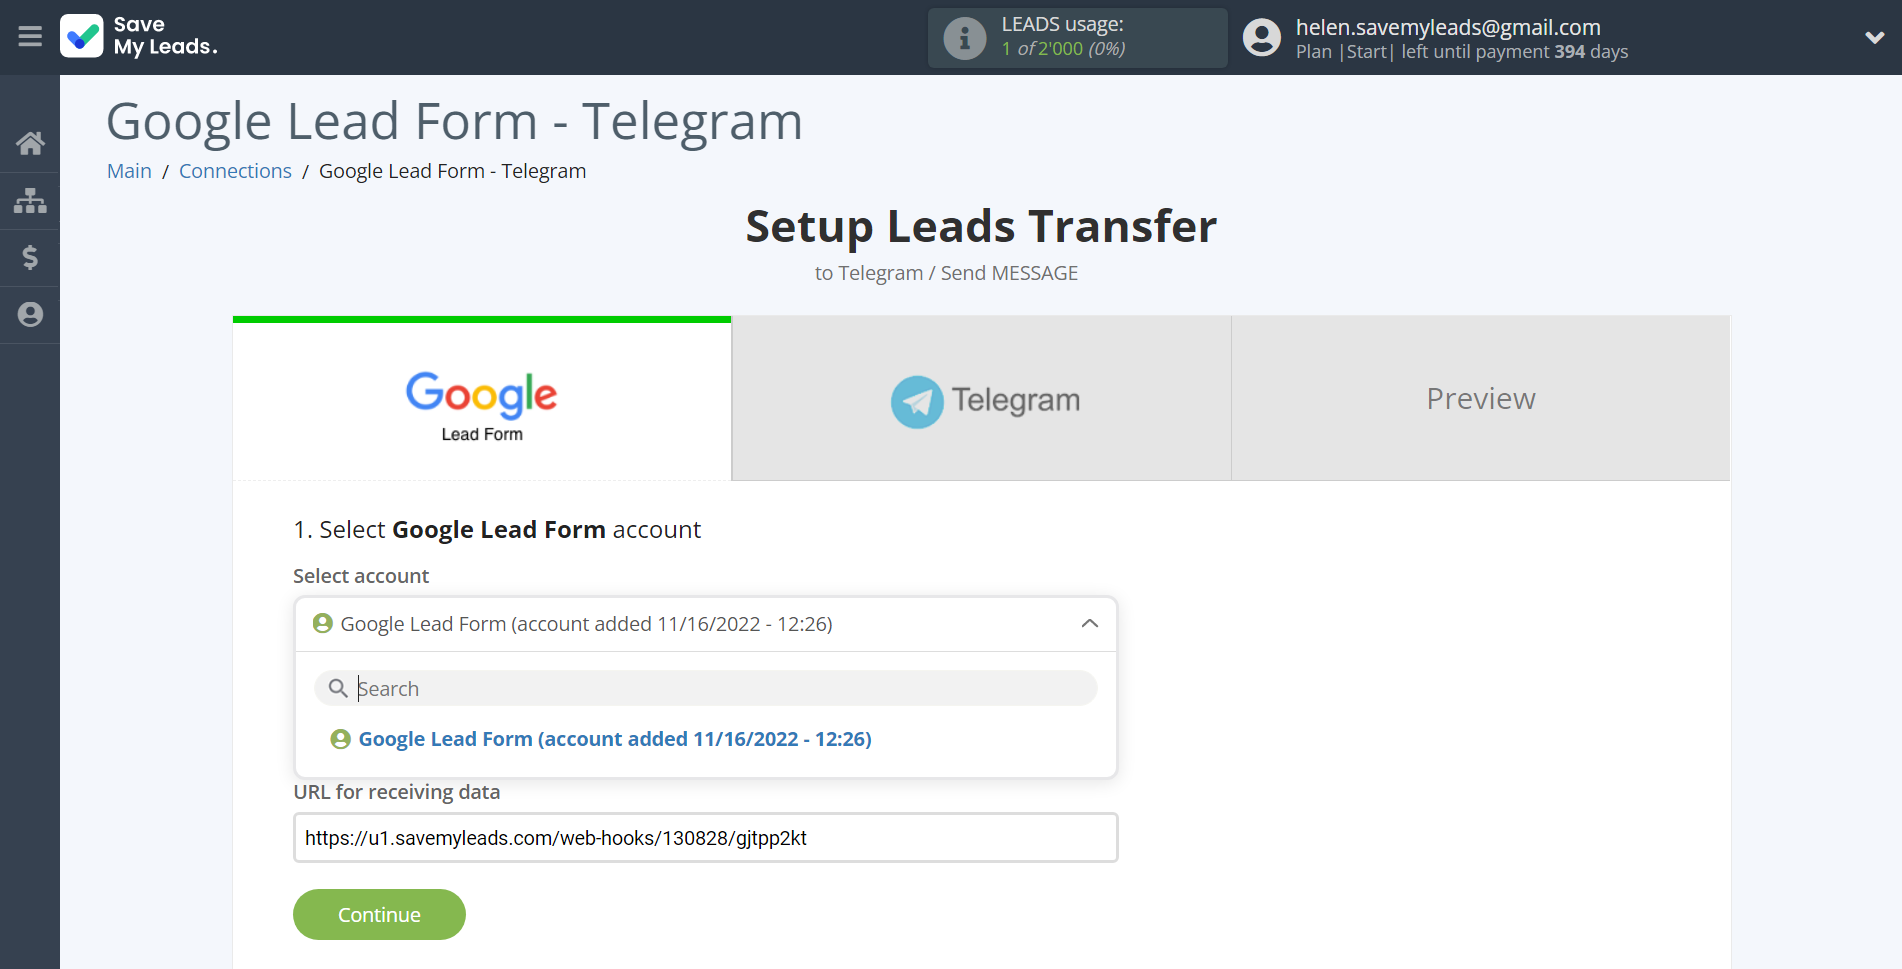 How to Connect Google Lead Form with Telegram | Data Source account selection